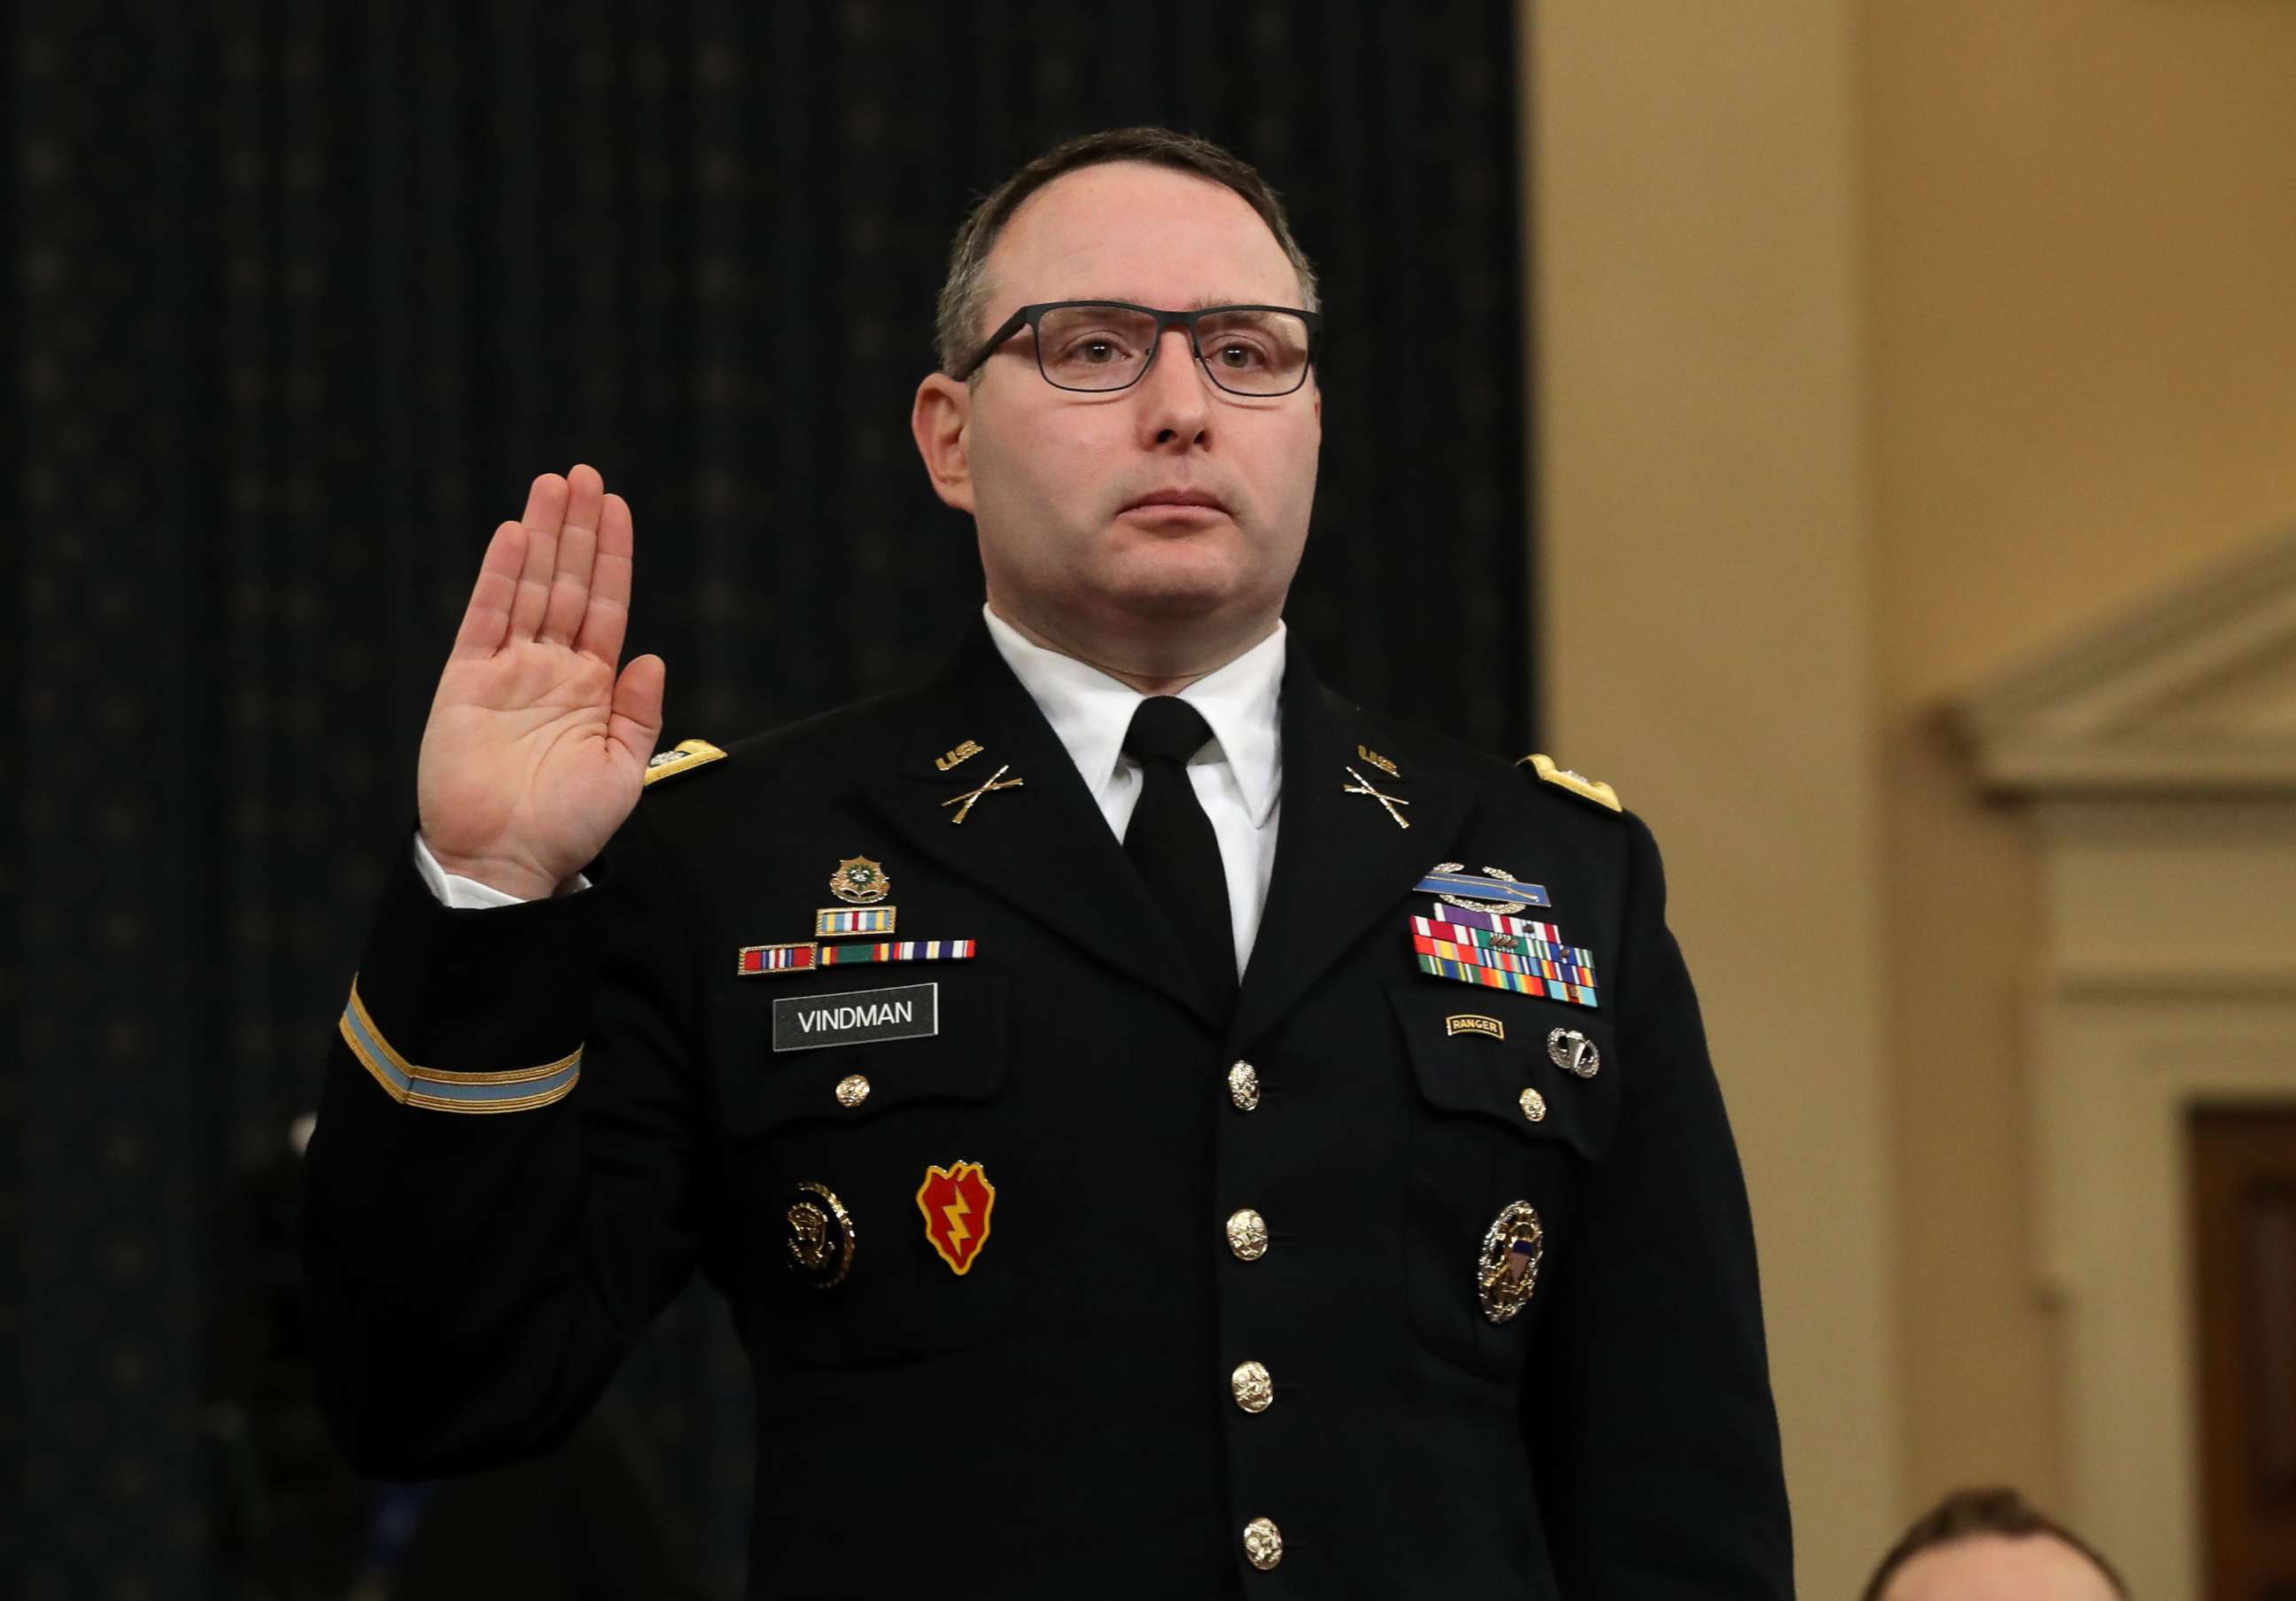 PHOTO: National Security Council Director for European Affairs Lt. Col. Alexander Vindman is sworn in to testify before the House Intelligence Committee in the Longworth House Office Building on Capitol Hill in Washington, Nov. 19, 2019.